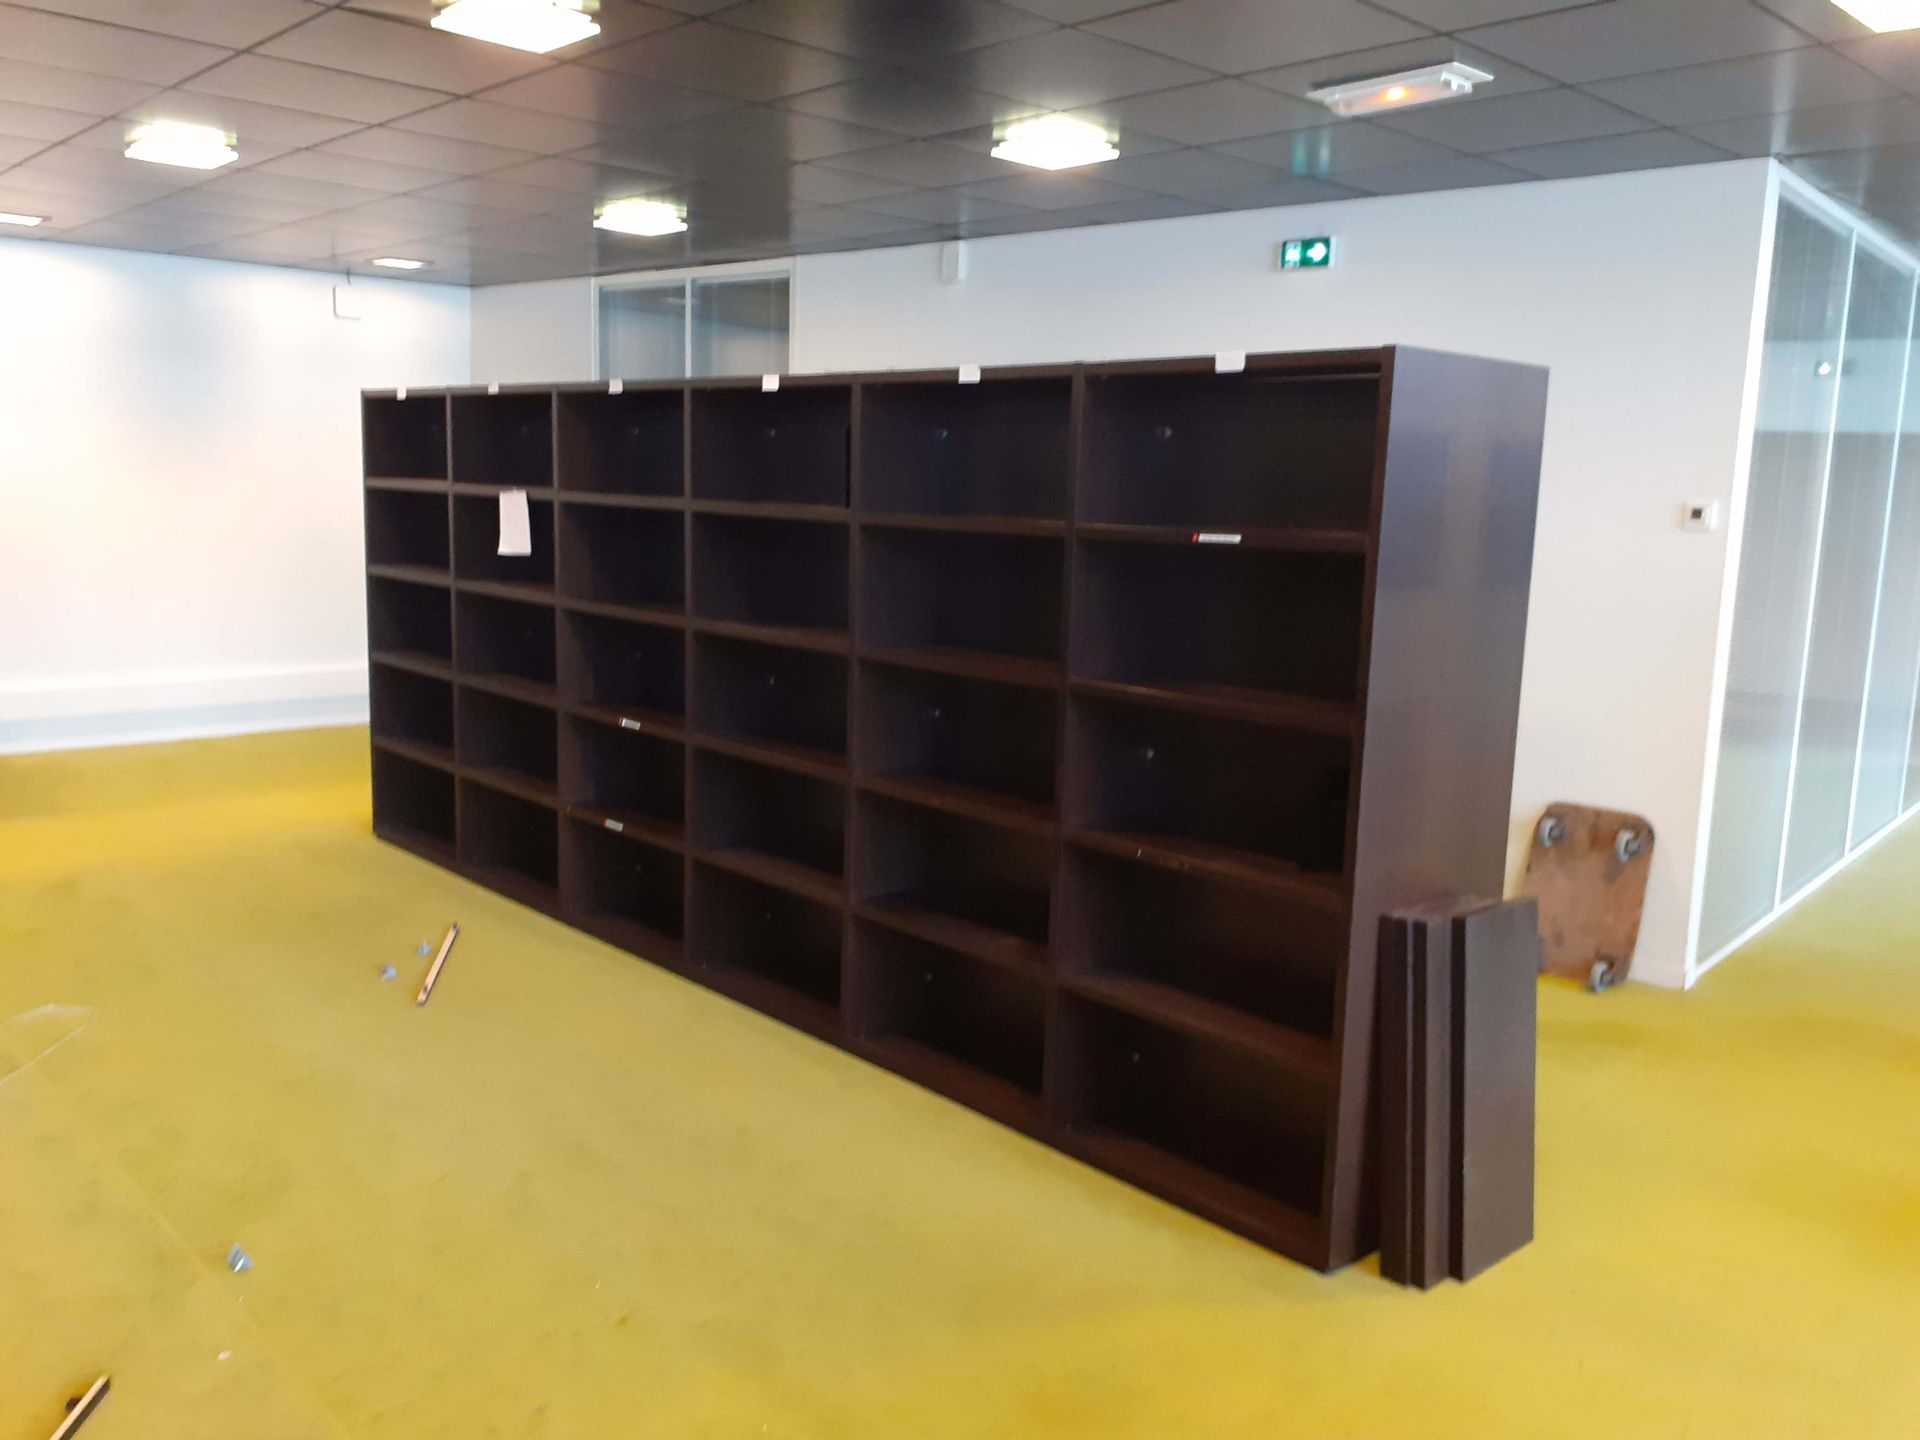 Null Library furniture dating from 2007. Shelves, retractable shelves, display u&hellip;